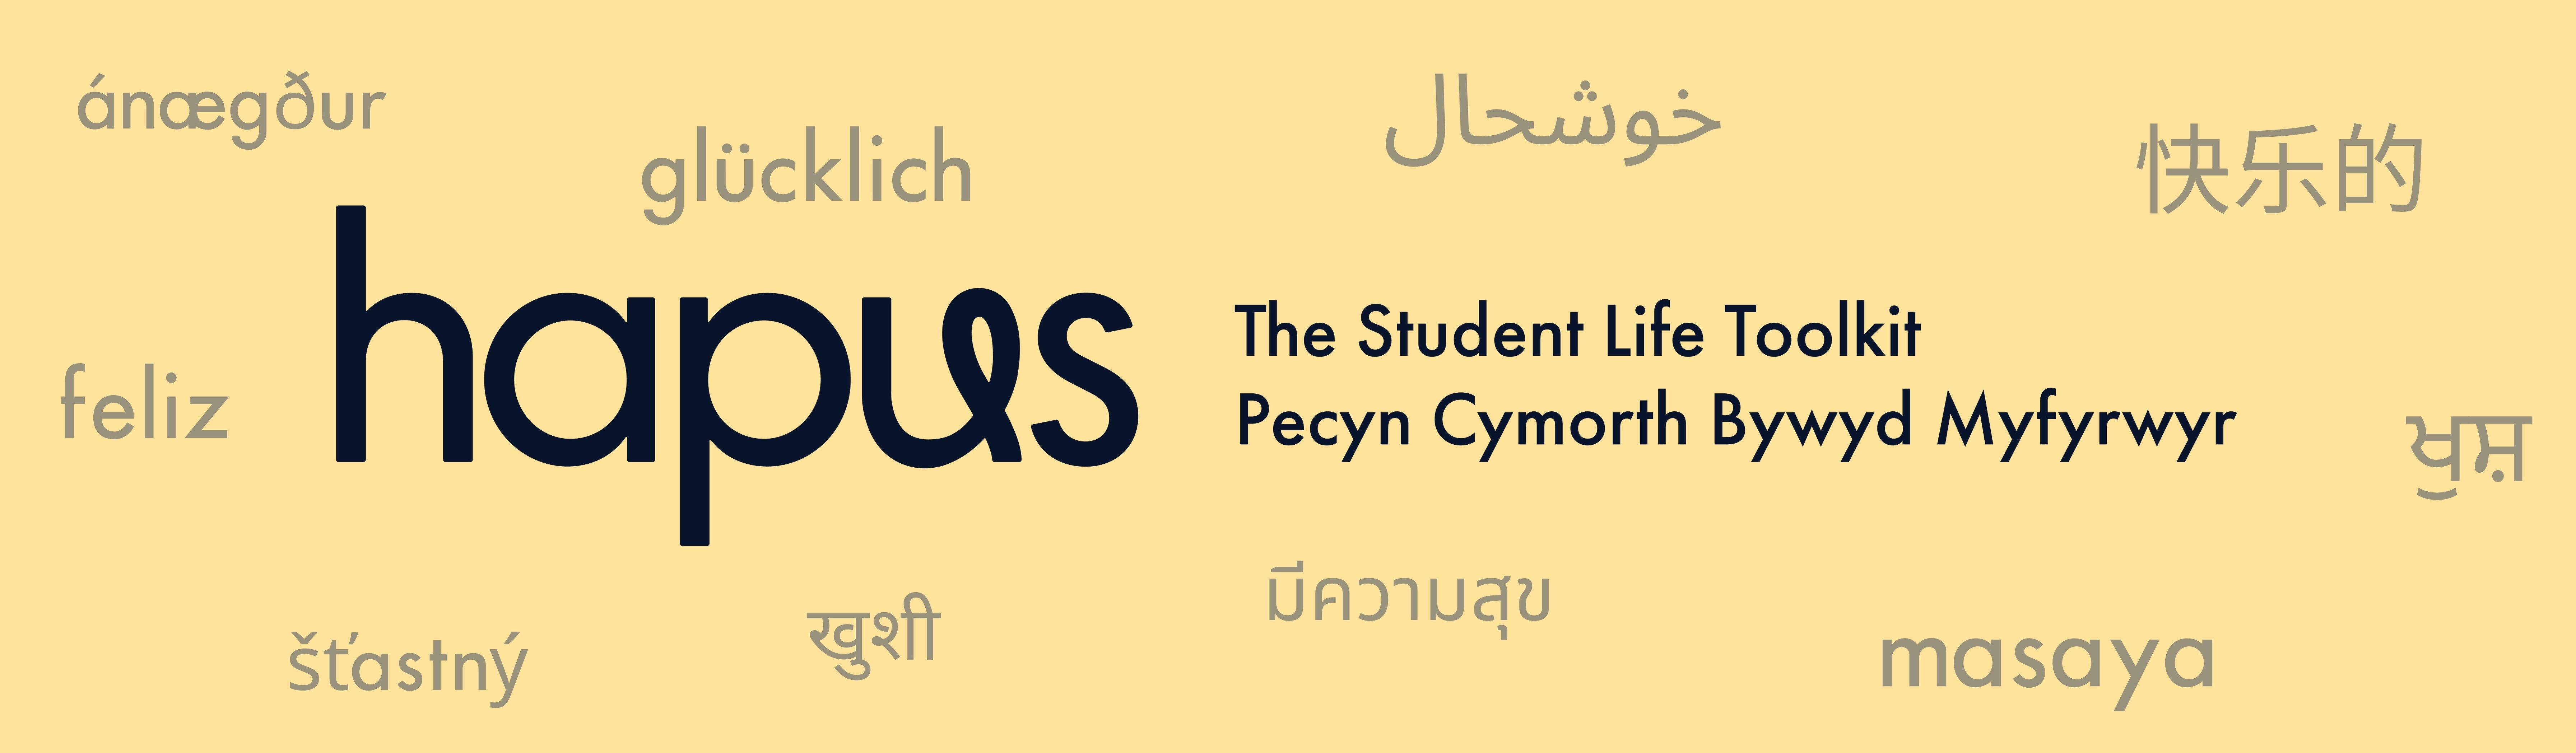 The 'Hapus - Student Life Toolkit' is displayed in large letters, in the background the word 'Hapus' is shown translated into a number of different languages from around the world.